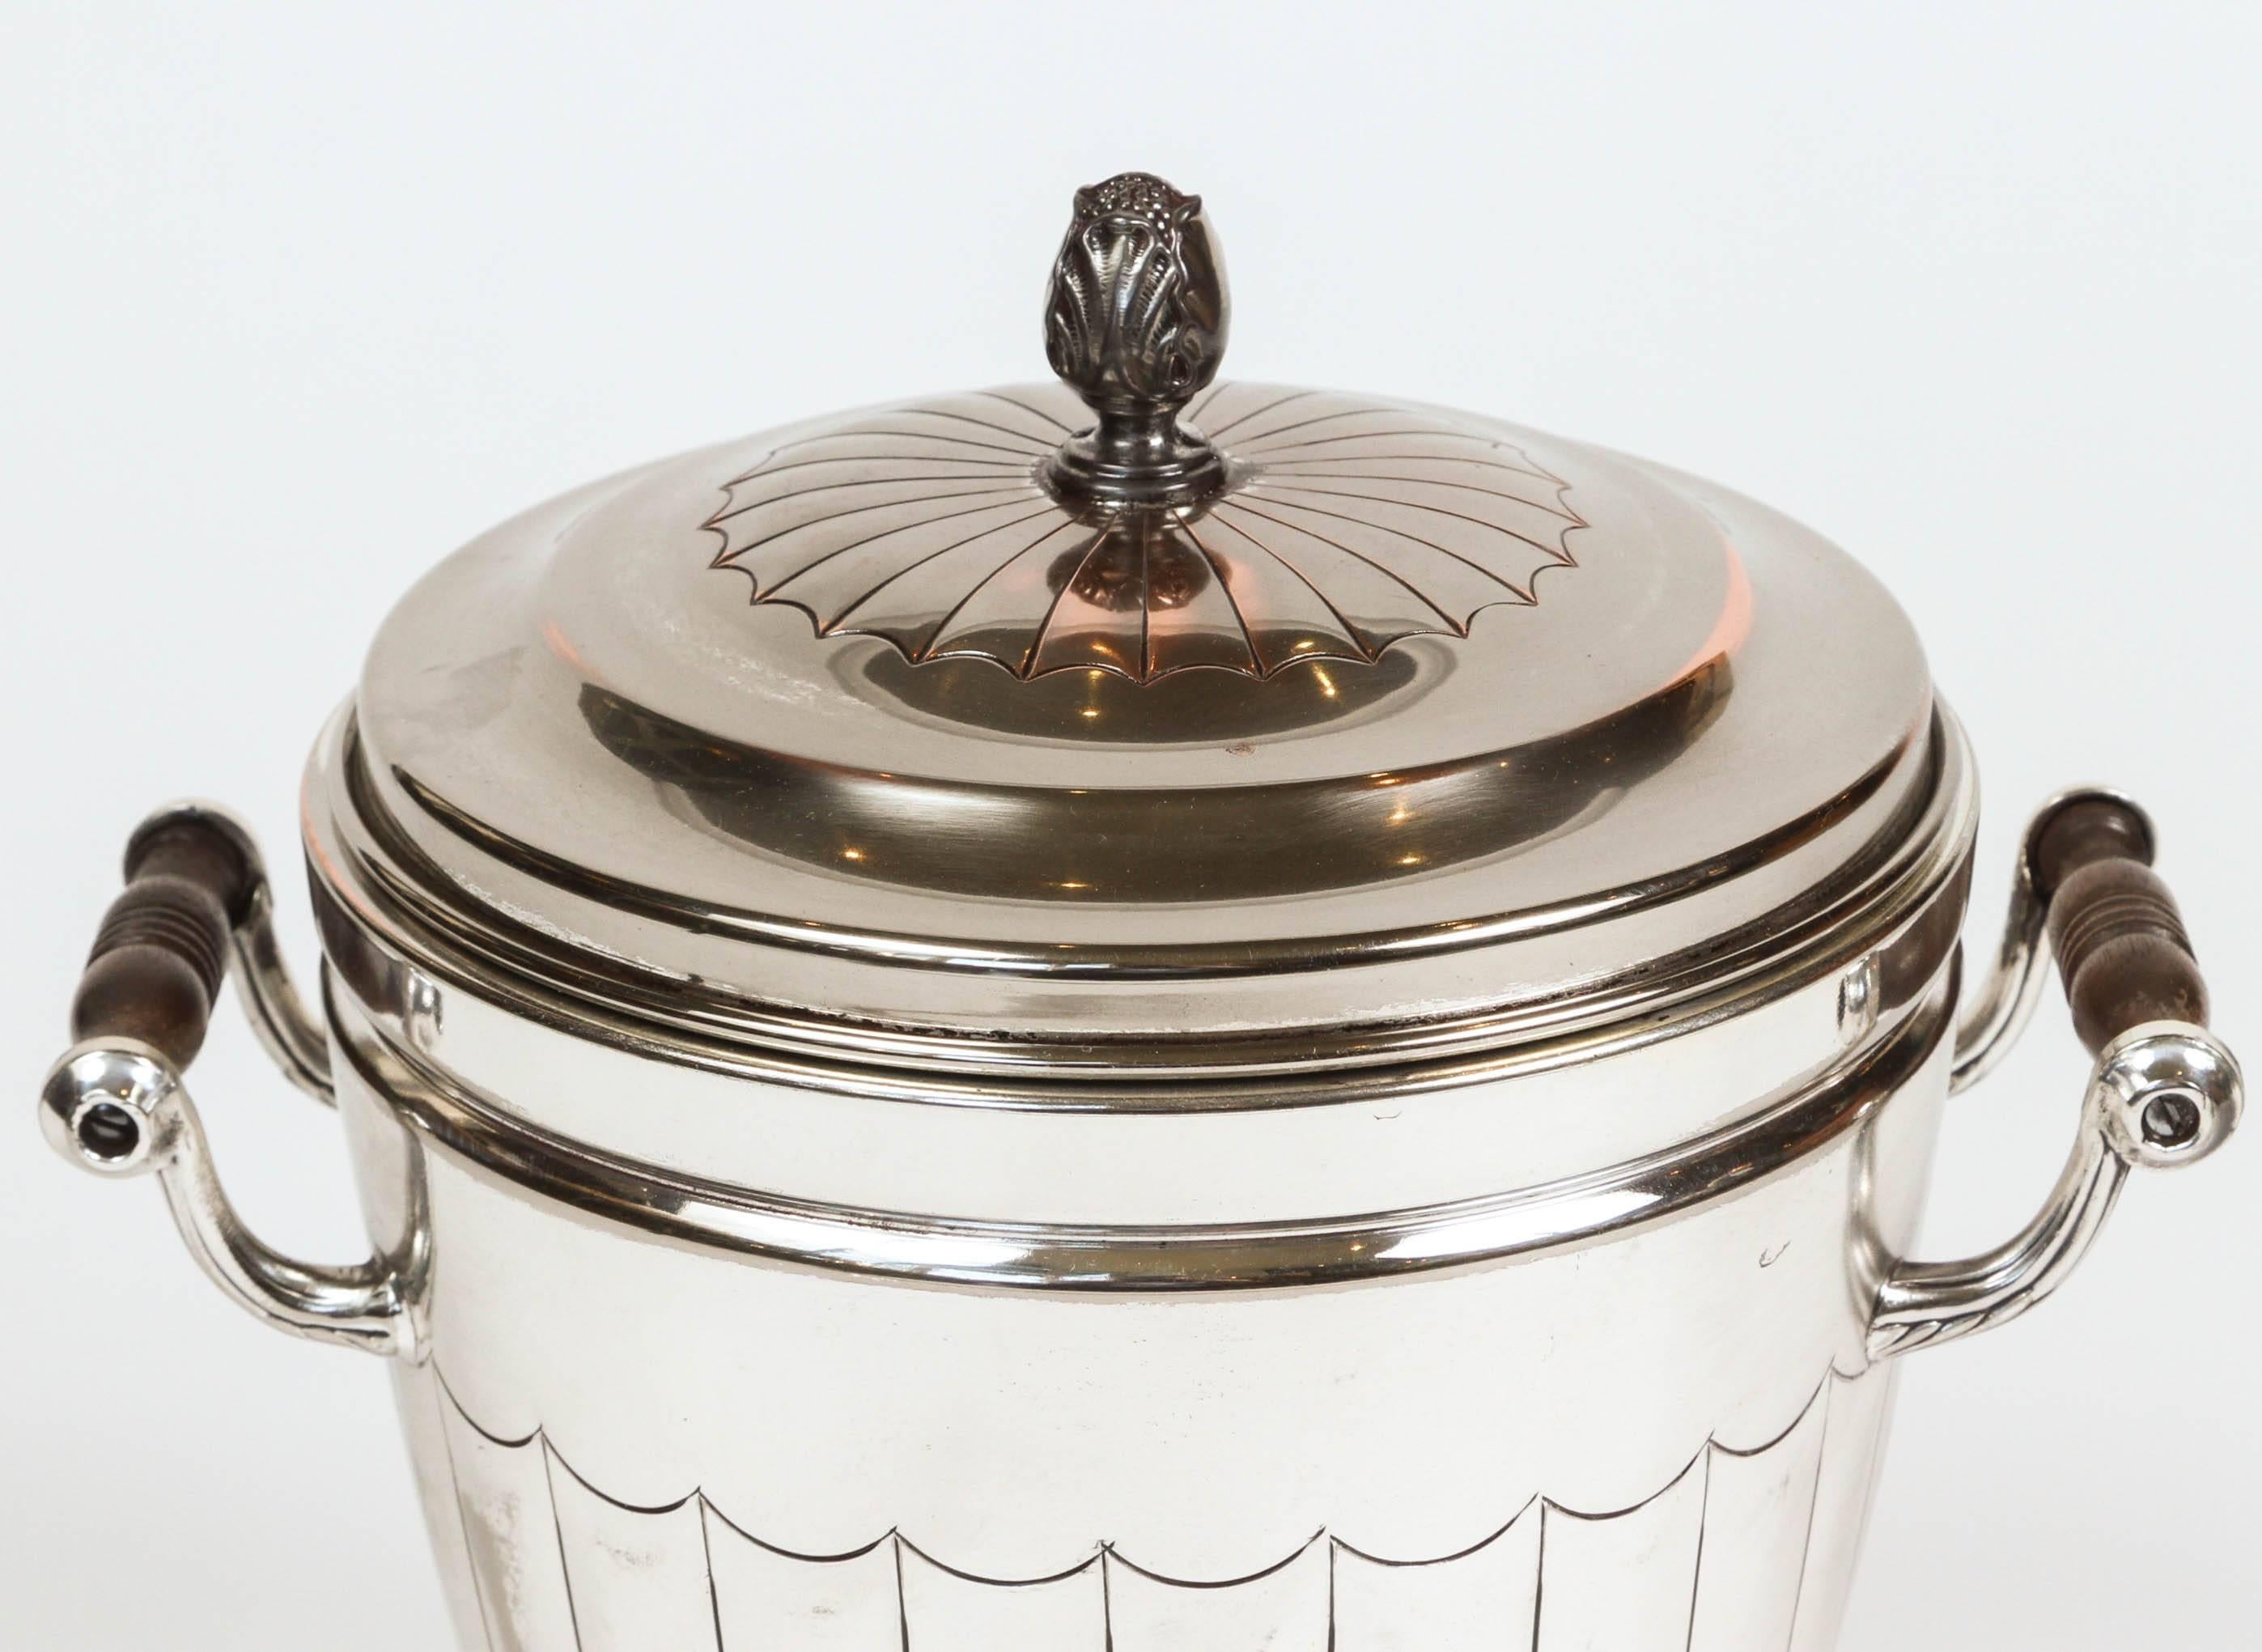 Vintage newly polished silver plate ice bucket with mercury glass interior and carved wood handles. It is stamped underneath 